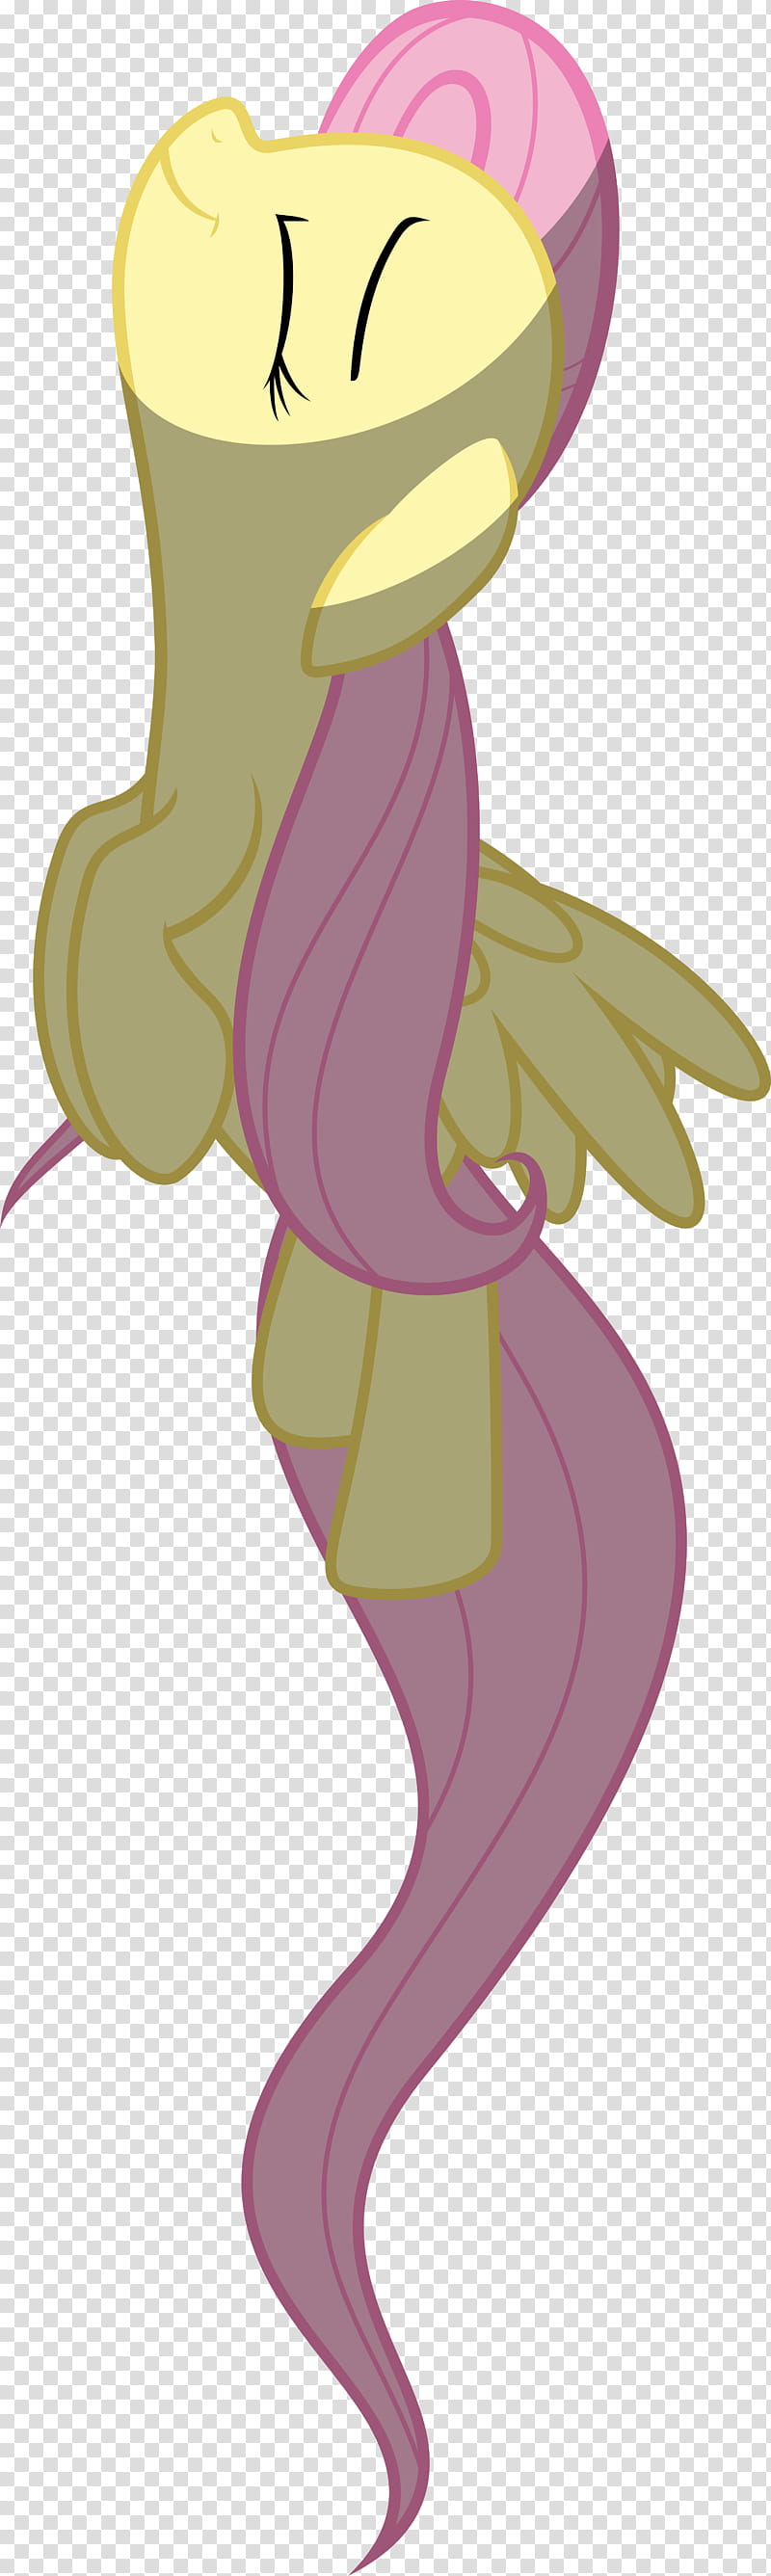 Fluttershy Regains Her Confidence, yellow My Little Pony character illustration transparent background PNG clipart